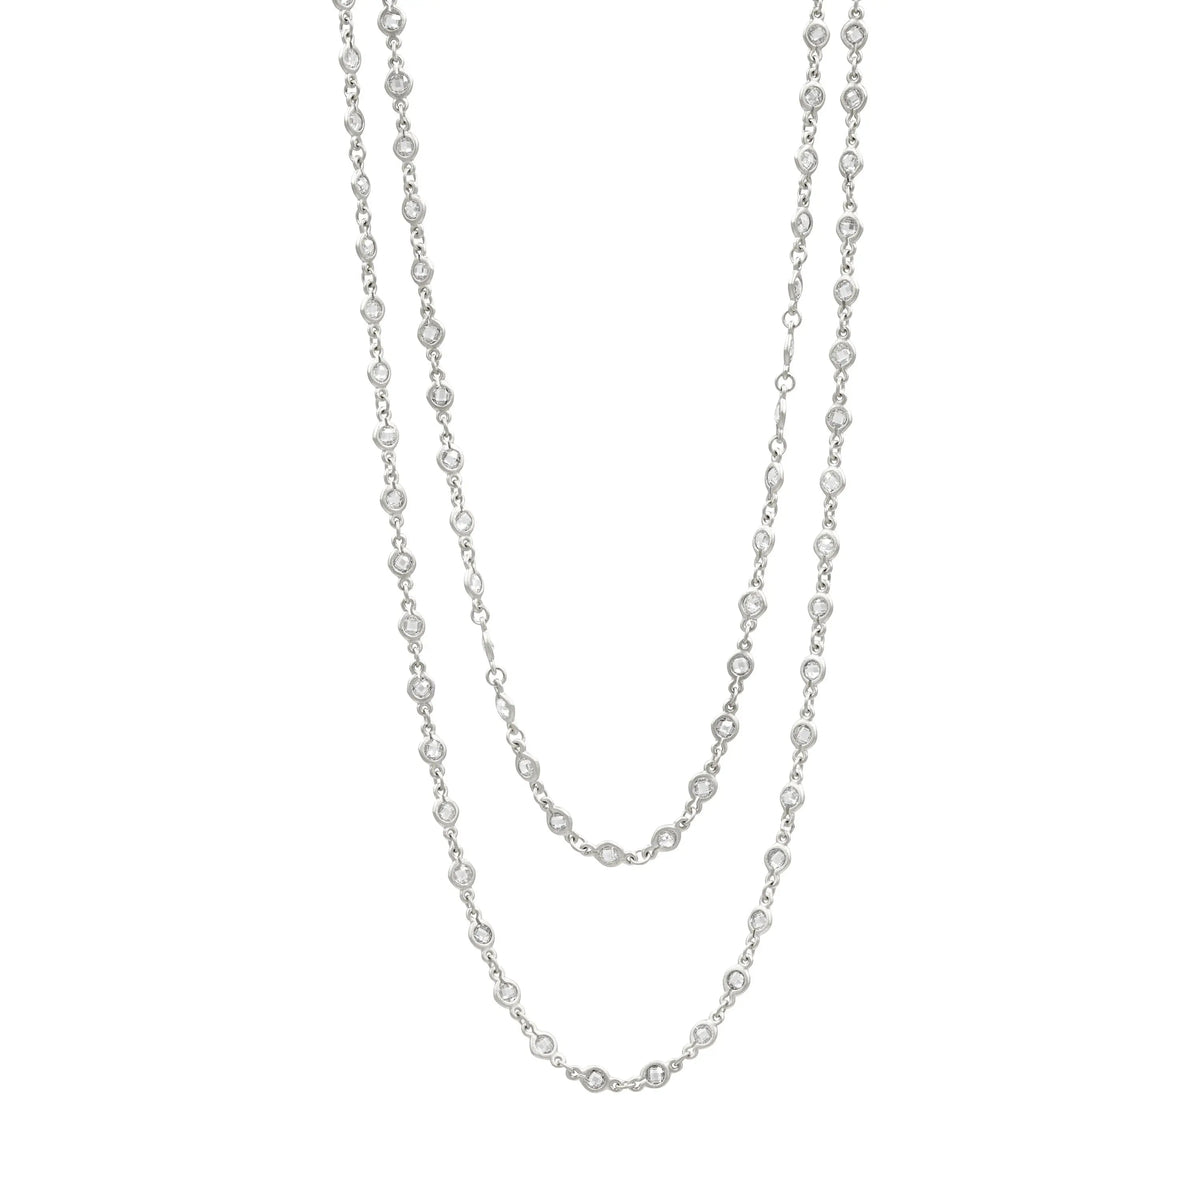 Faceted Stones Wrap Chain Necklace – FREIDA ROTHMAN